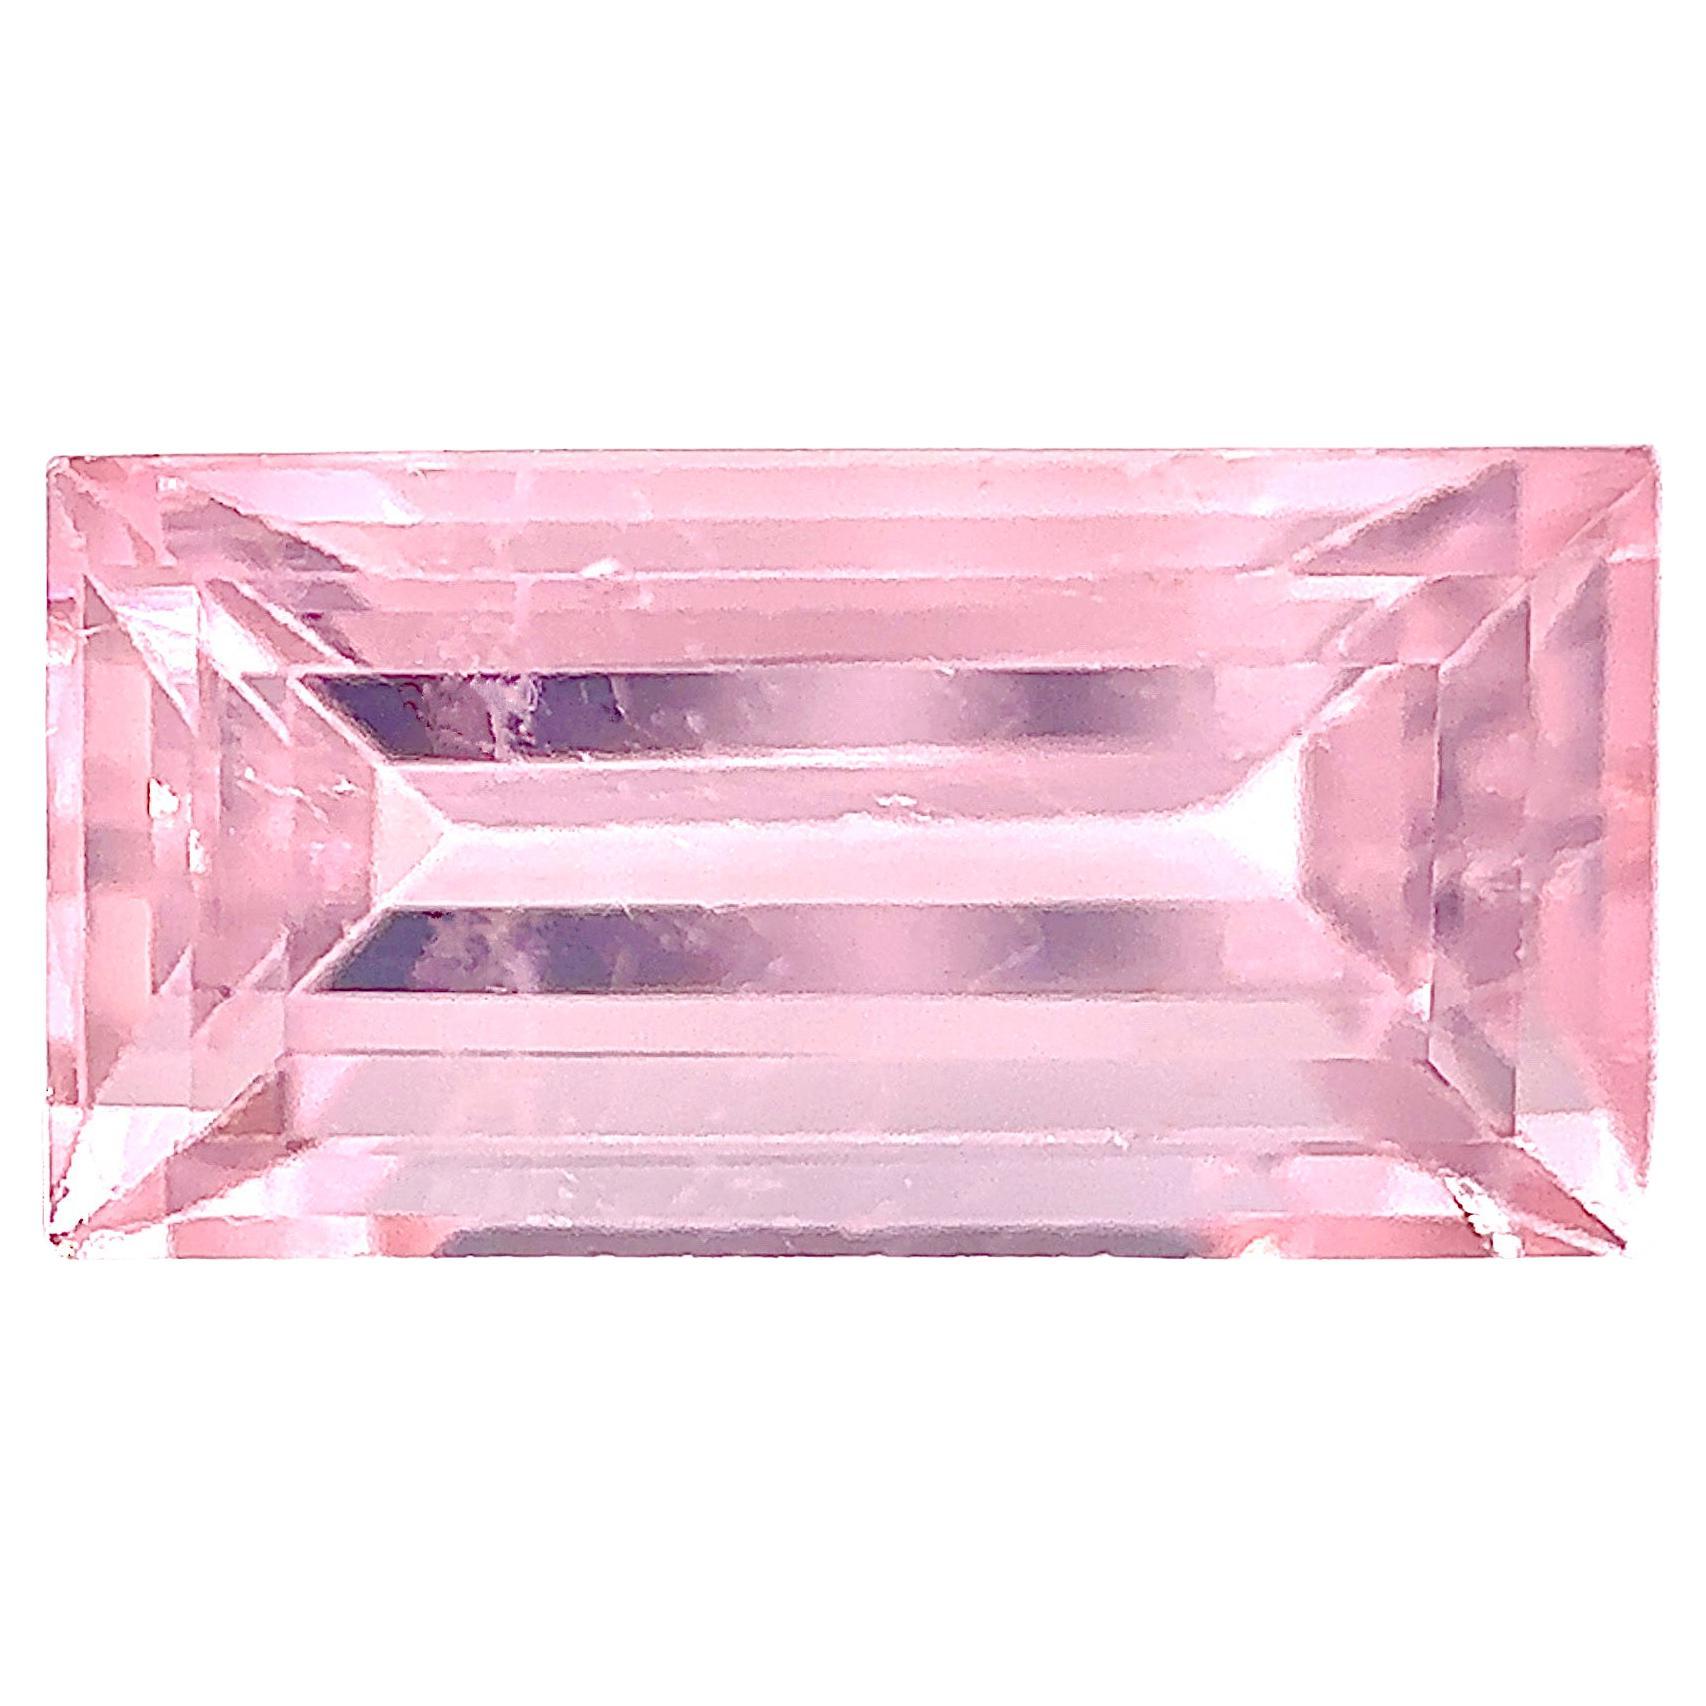 3.67 Carat Step Cut Natural Tourmaline Loose stone in Cherry Blossom Pink 